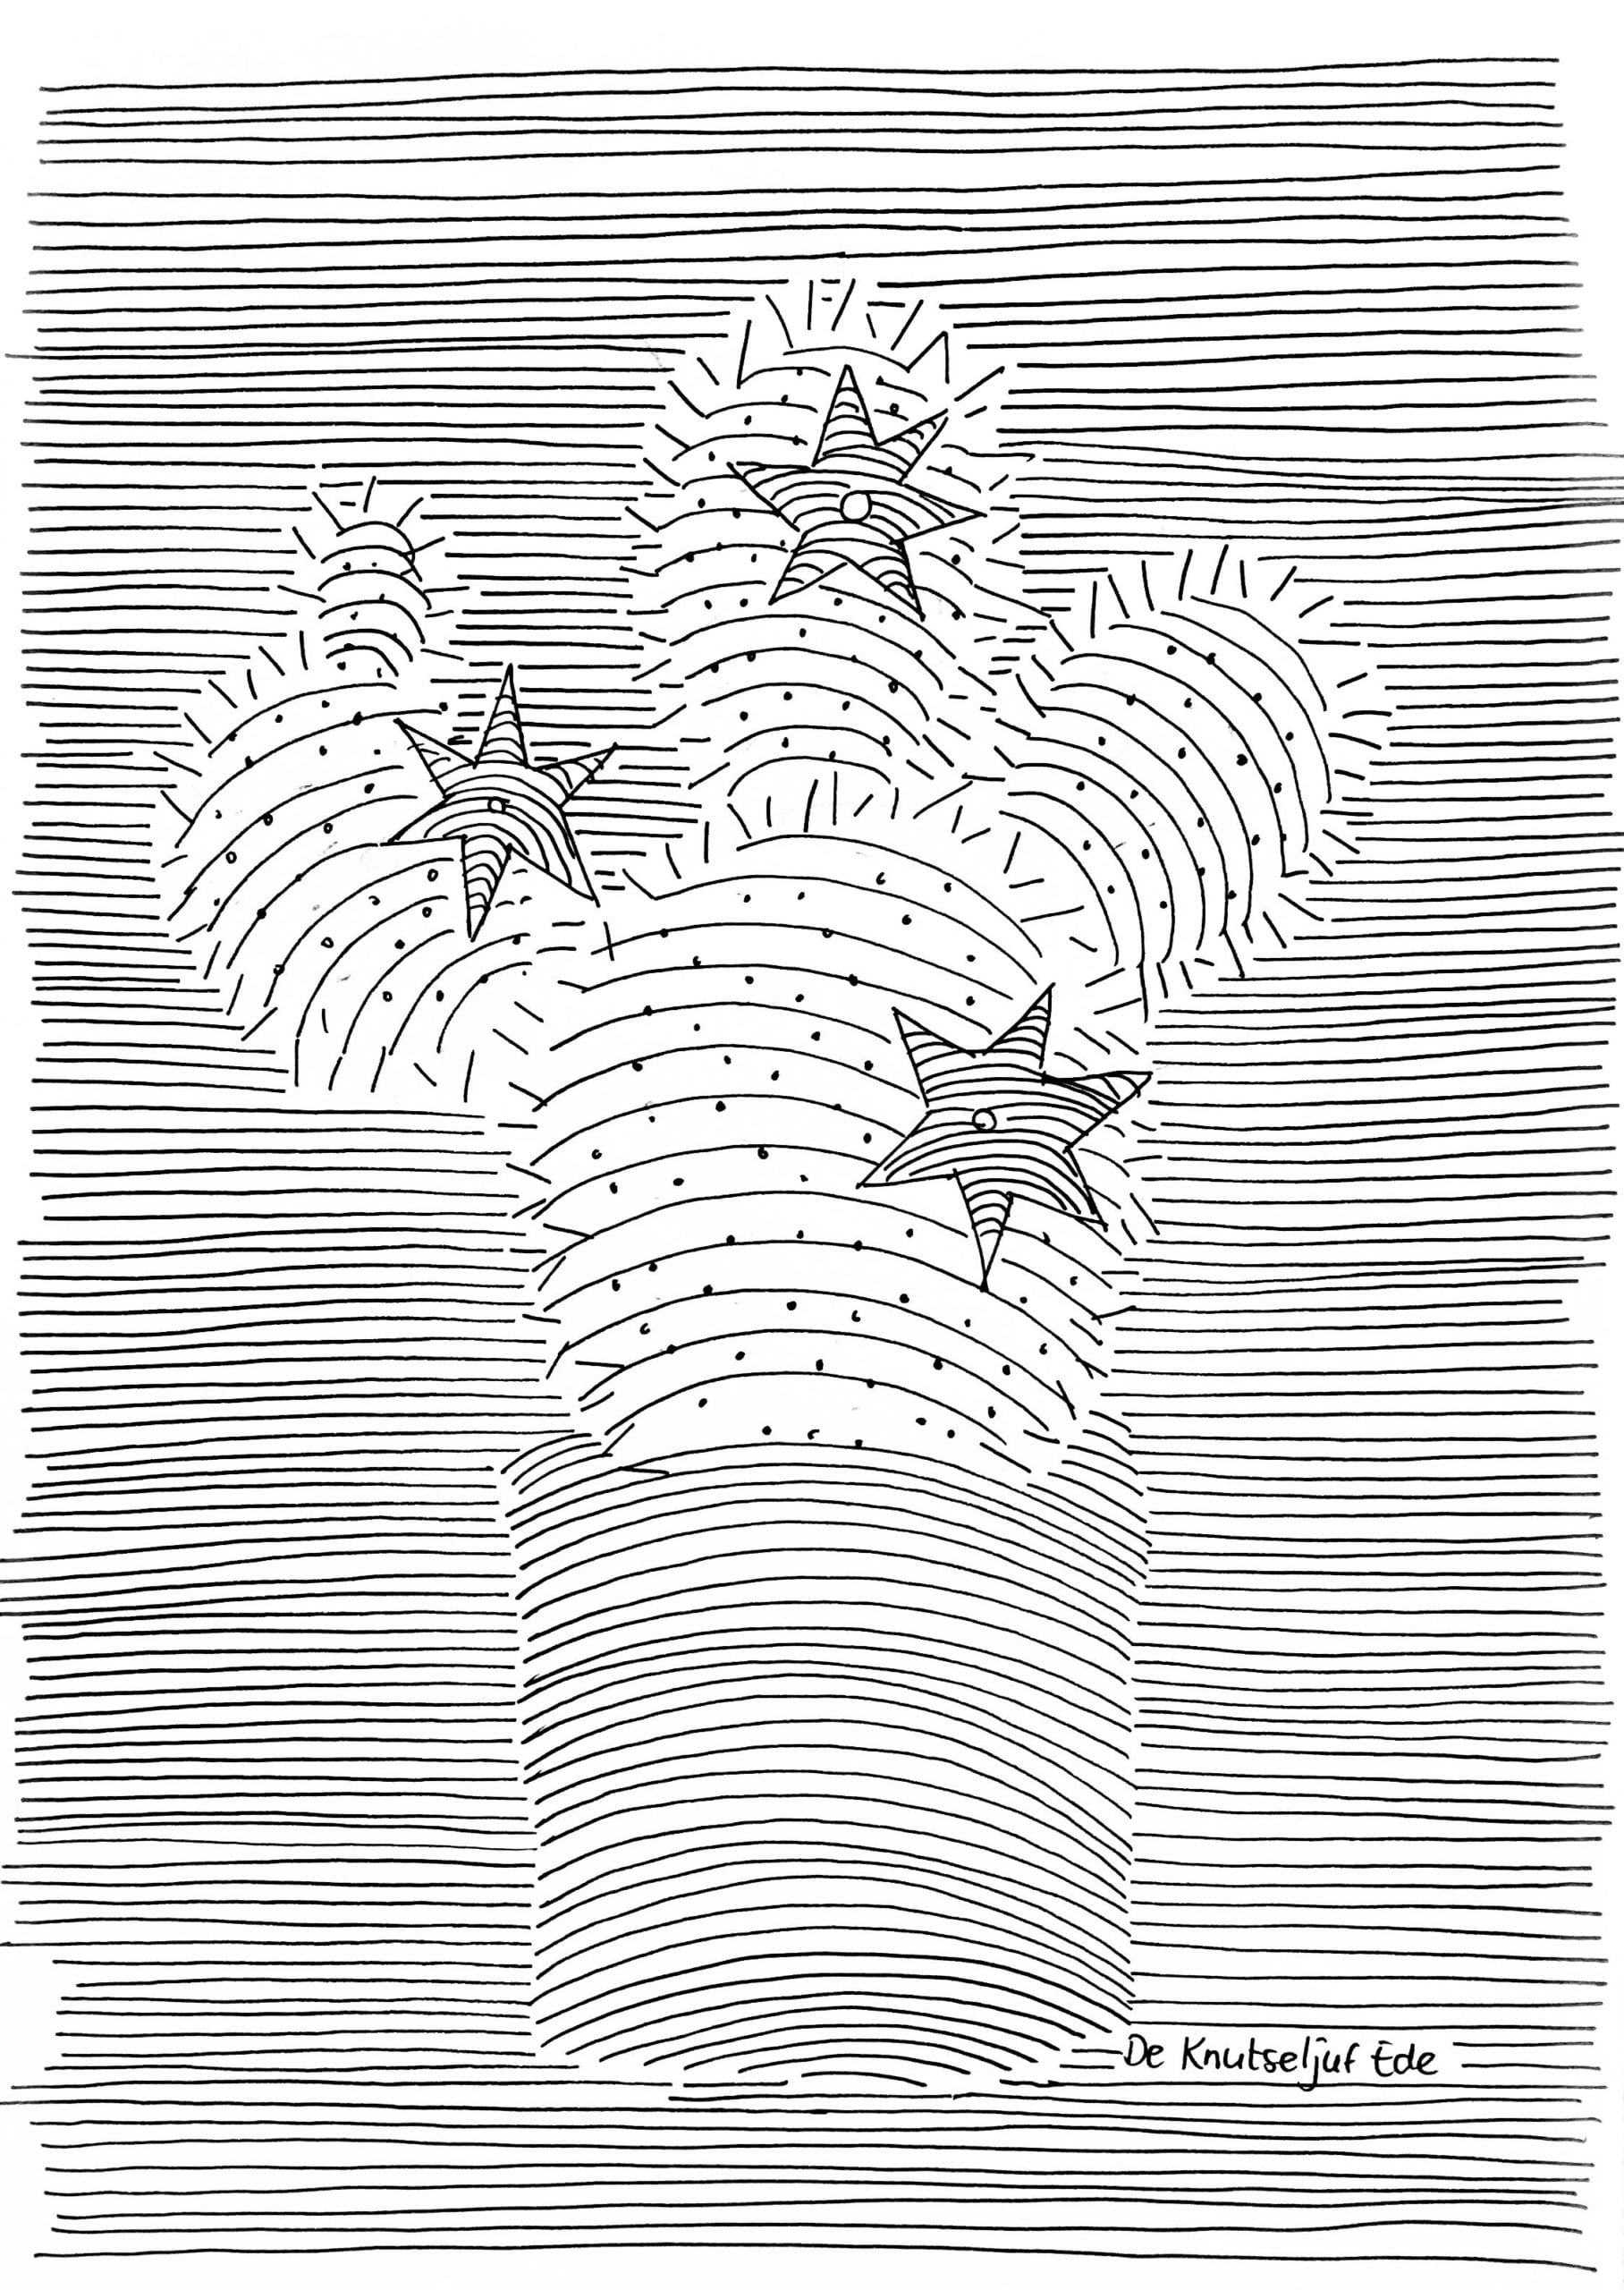 Parallel line drawing of a cactus example for free children’s art lesson